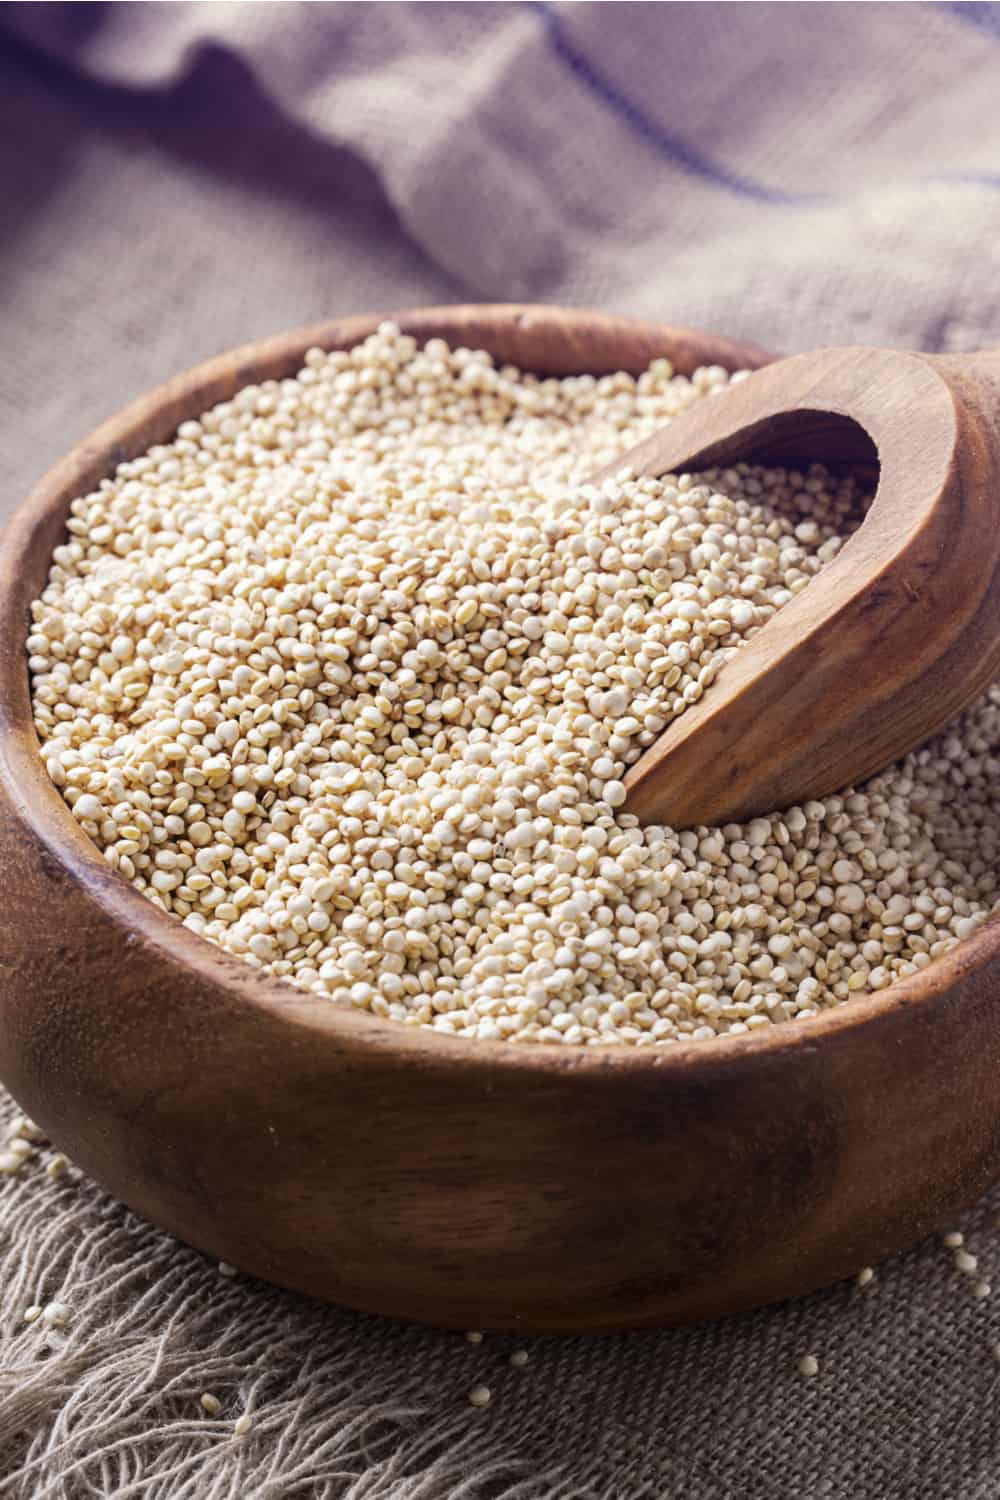 How Long Does Quinoa Last? (Tips to Store for Long Time)